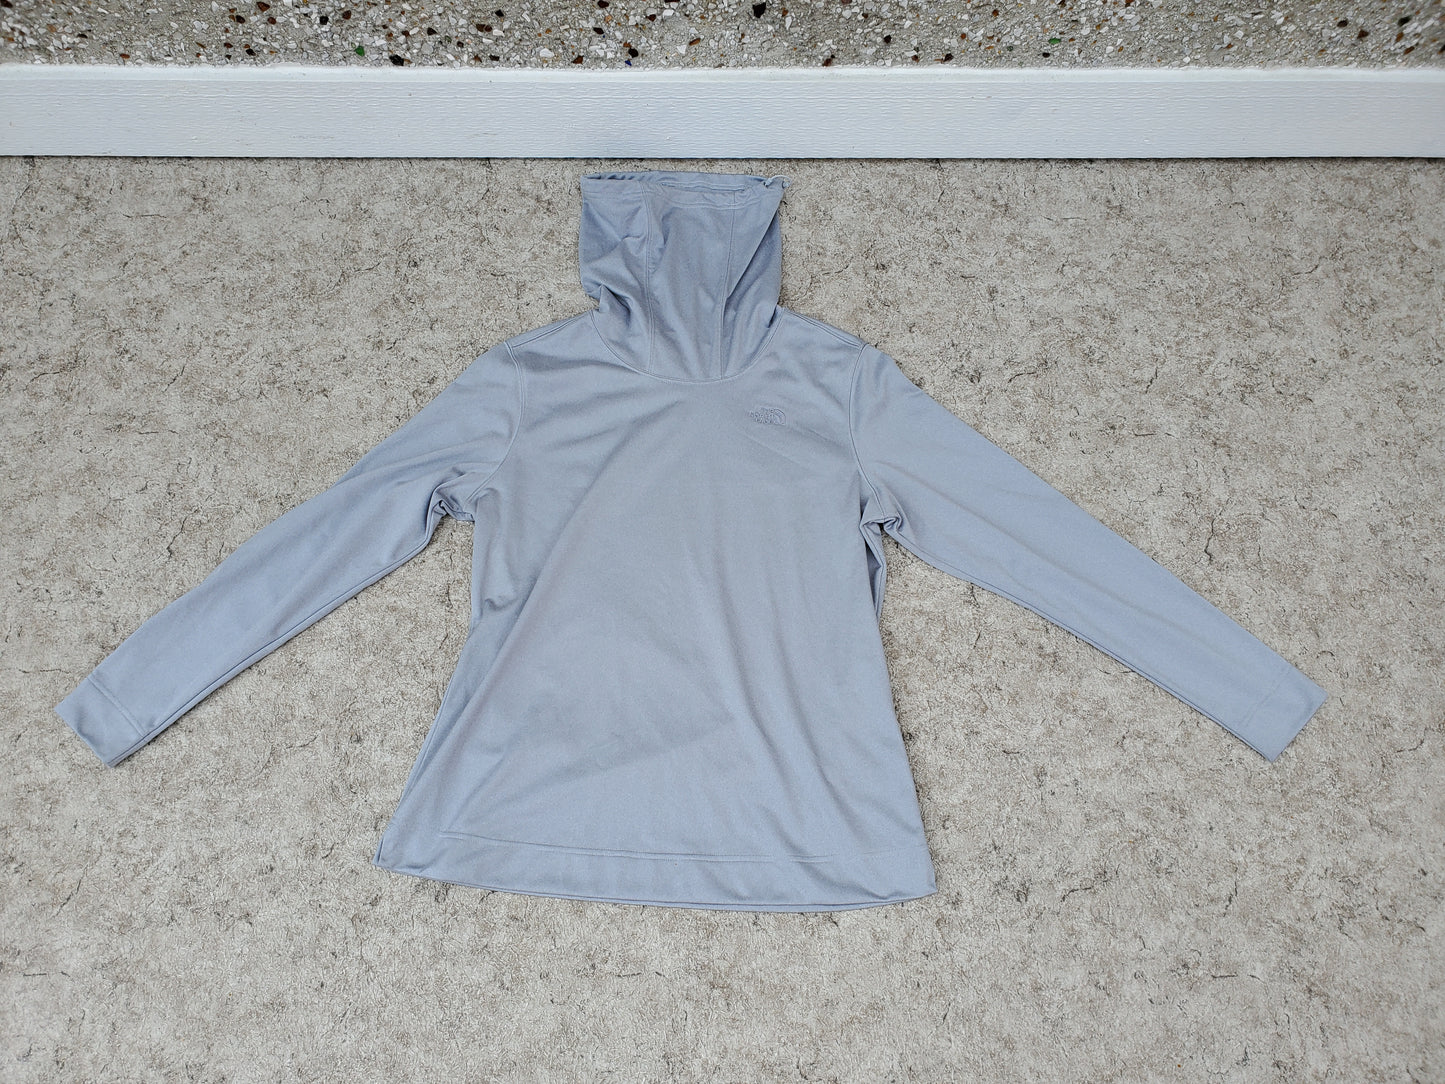 Hoodie Shirt Ladies Size X Large The North Face Grey New Demo Model